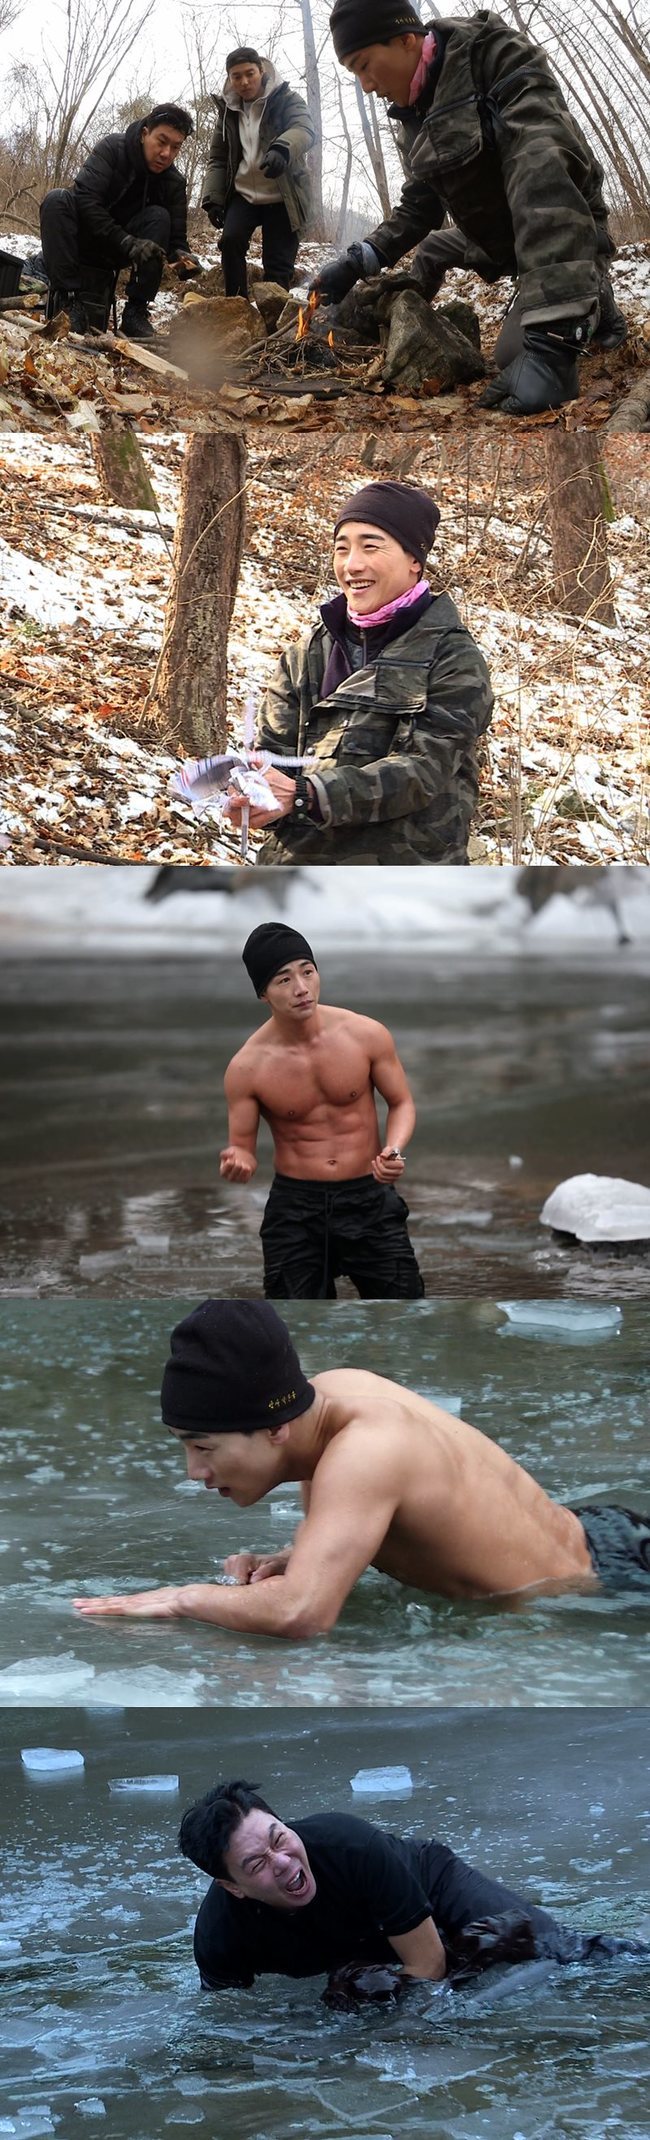 My Little Old Boy Park Gun X Lee Sang-min X Oh Min-seoks unusual mountain Earth 2 is revealed.At SBS My Little Old Boy, which will be broadcasted at 9:05 pm on February 21, Park Gun X Lee Sang-min X Oh Min-seoks extraordinary Earth 2 will unfold and surprise and laugh at the same time.Park Gun took Lee Sang-min and Oh Min-seok to focus on the Bengers attention in search of a deep mountain where people are rare.It turns out that Park Gun, who worked as a Special Warrior for 15 years, was trying to teach the two brothers how to survive even in extreme situations.In the cold, Park Gun attracted attention by introducing Earth 2 technologies that transcend imagination with newspaper and canned cans.In particular, he was surprised to see the recording site by unveiling a super-class skill that can survive even if he falls into the water by forcing the object to the frozen river.So Sangmin and Minseok also said, If the earth is destroyed, I will go to Park Gun.